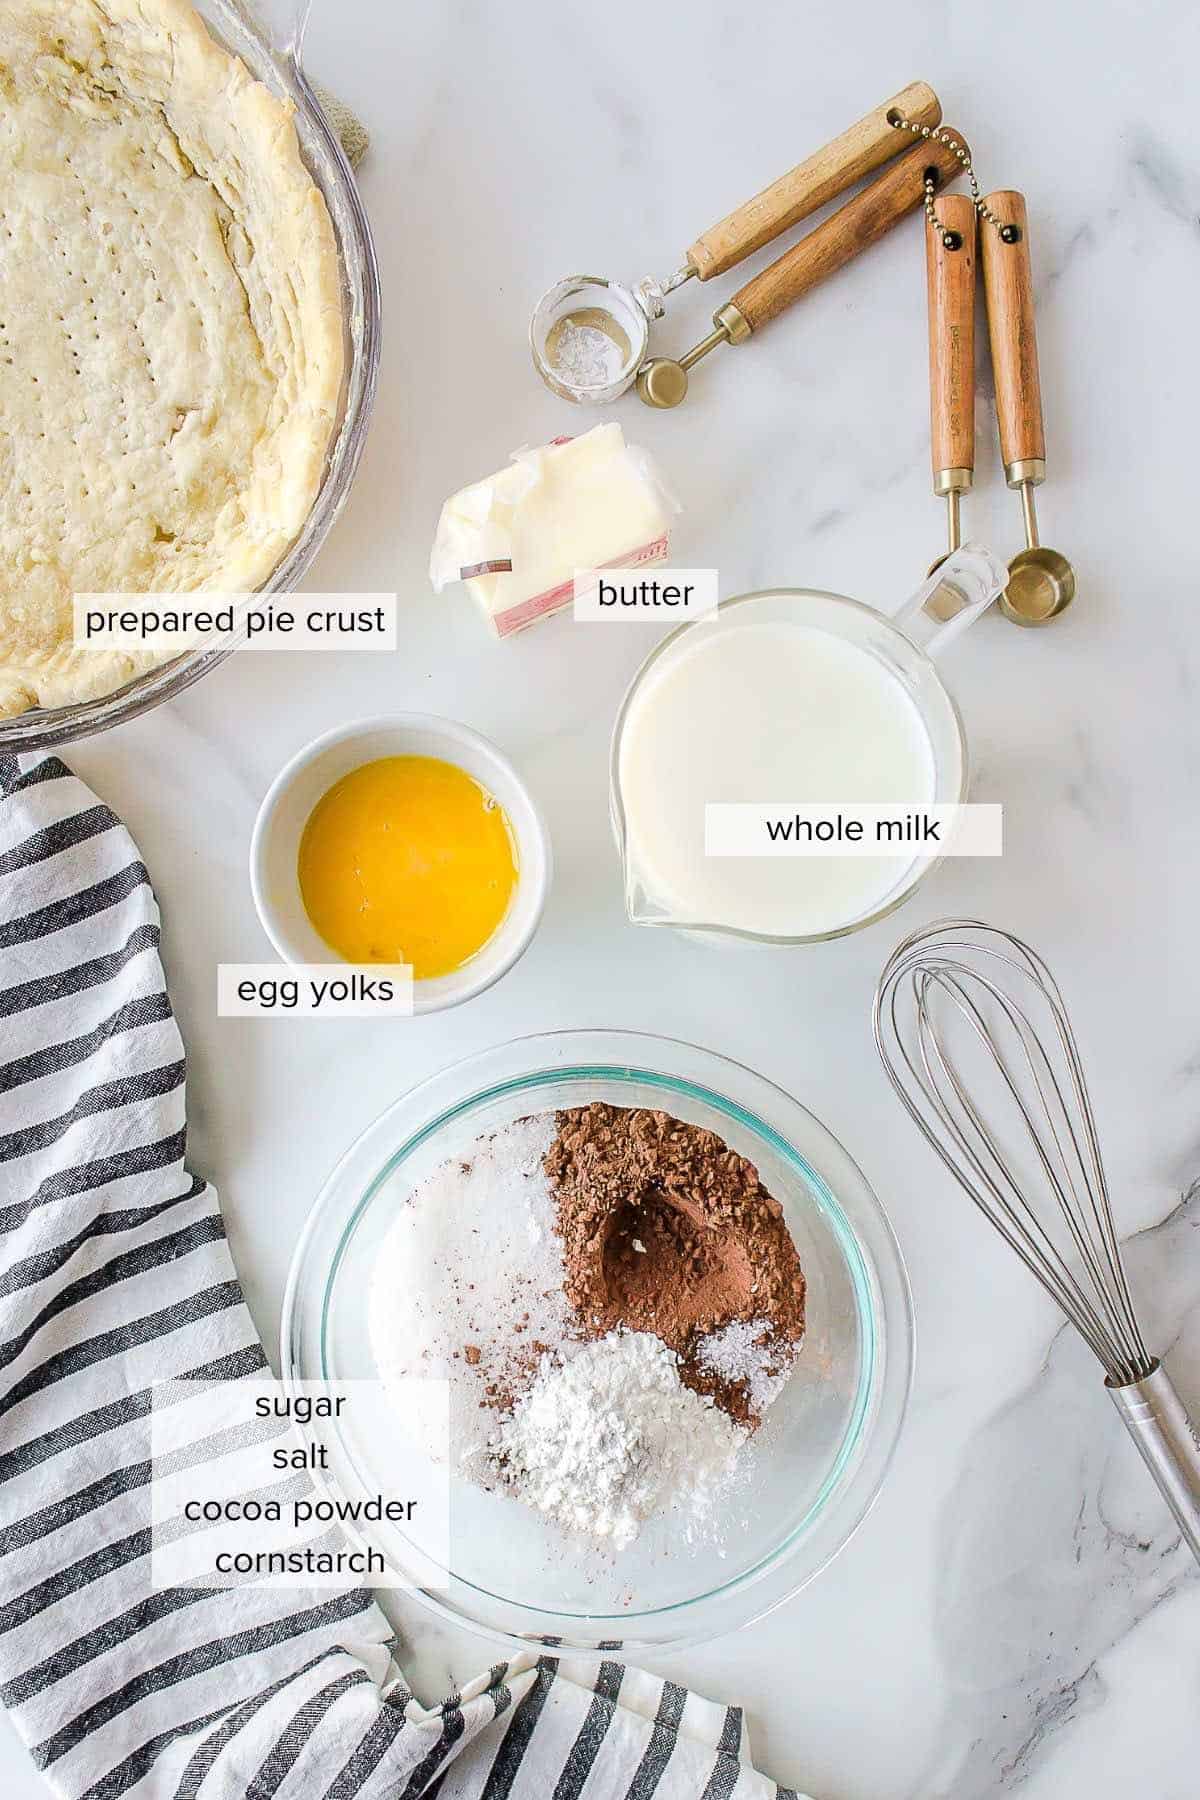 Ingredients to make a chocolate pie with prebaked pie crust, whole milk, eggs, sugar, salt, cocoa powder, cornstarch and butter.